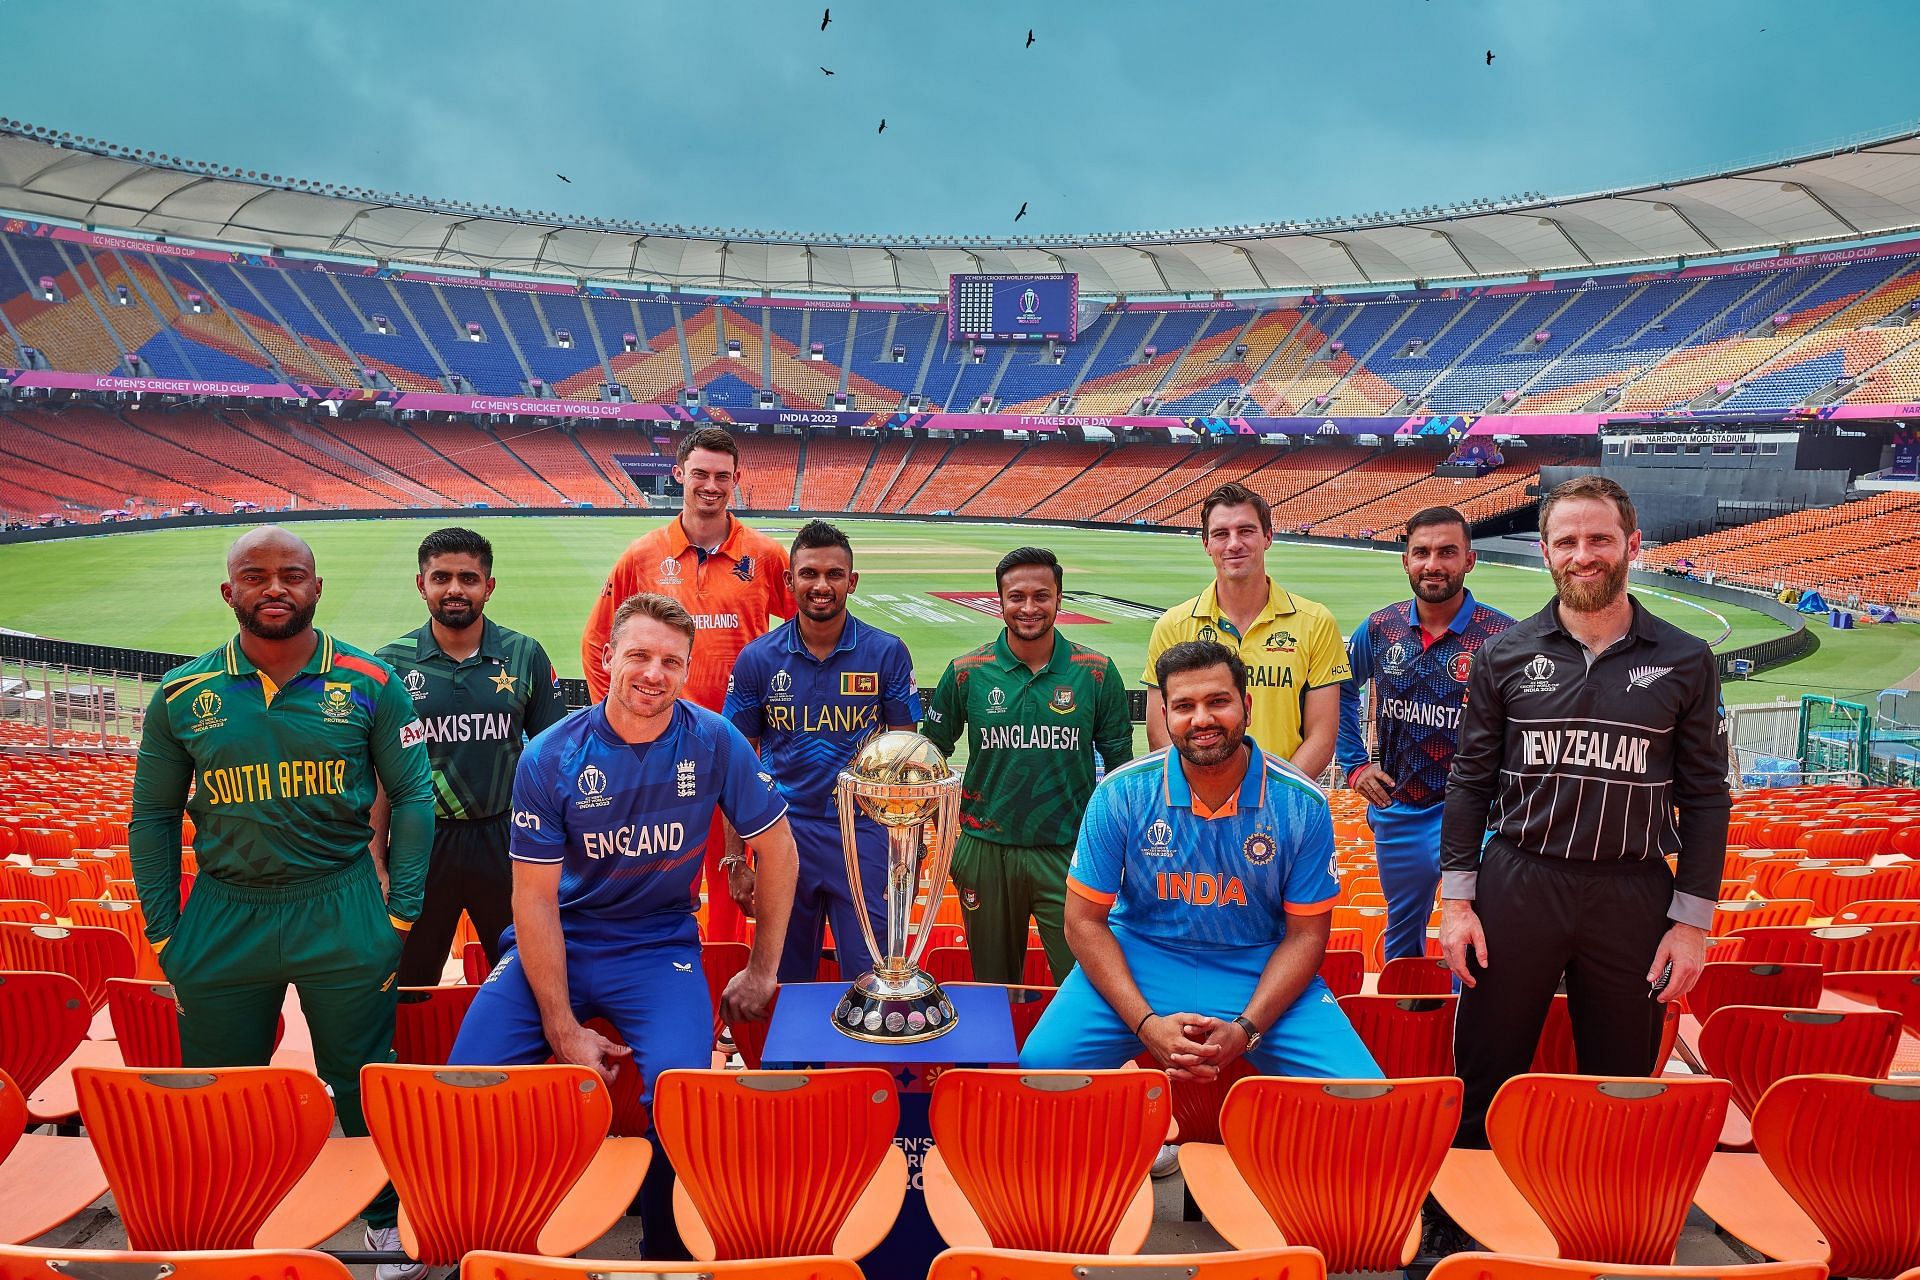 The ten captains posing with the World Cup trophy. (Credits: Twitter)